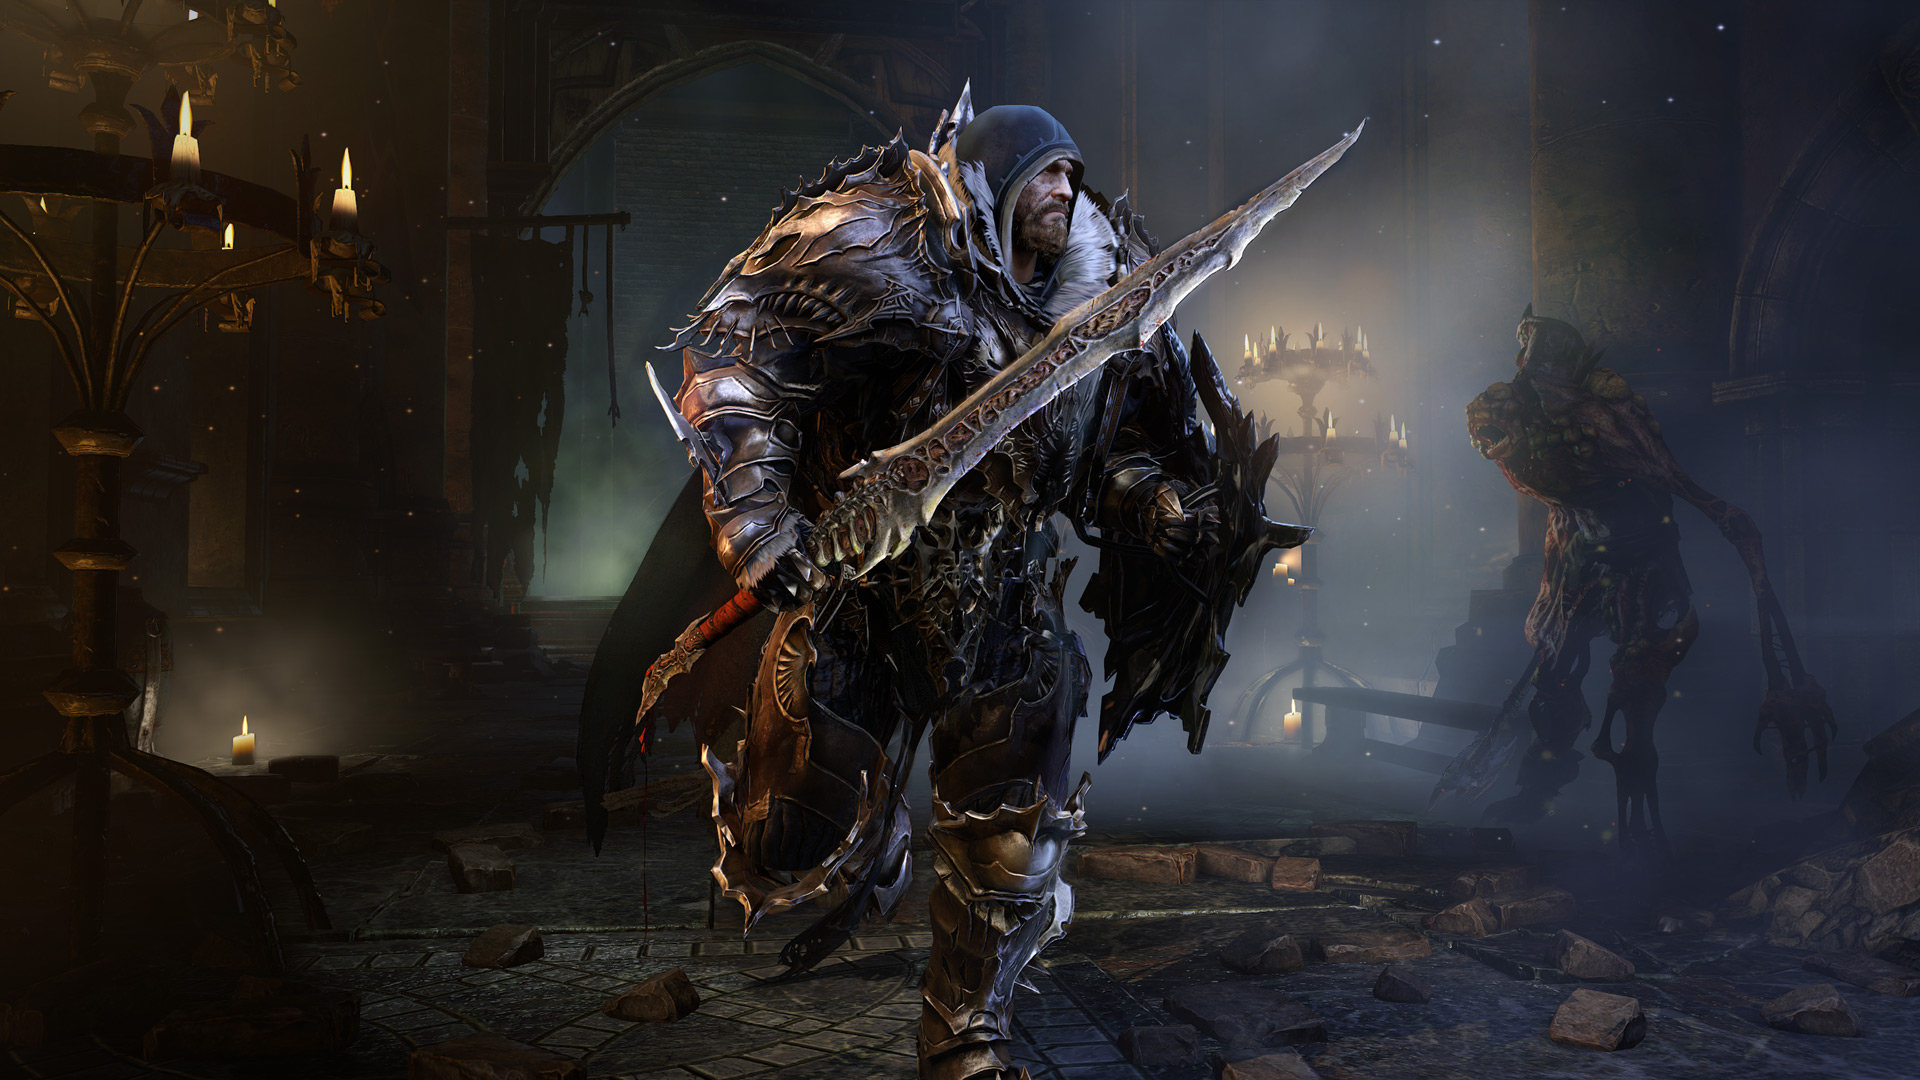 lords of the fallen shadow armor